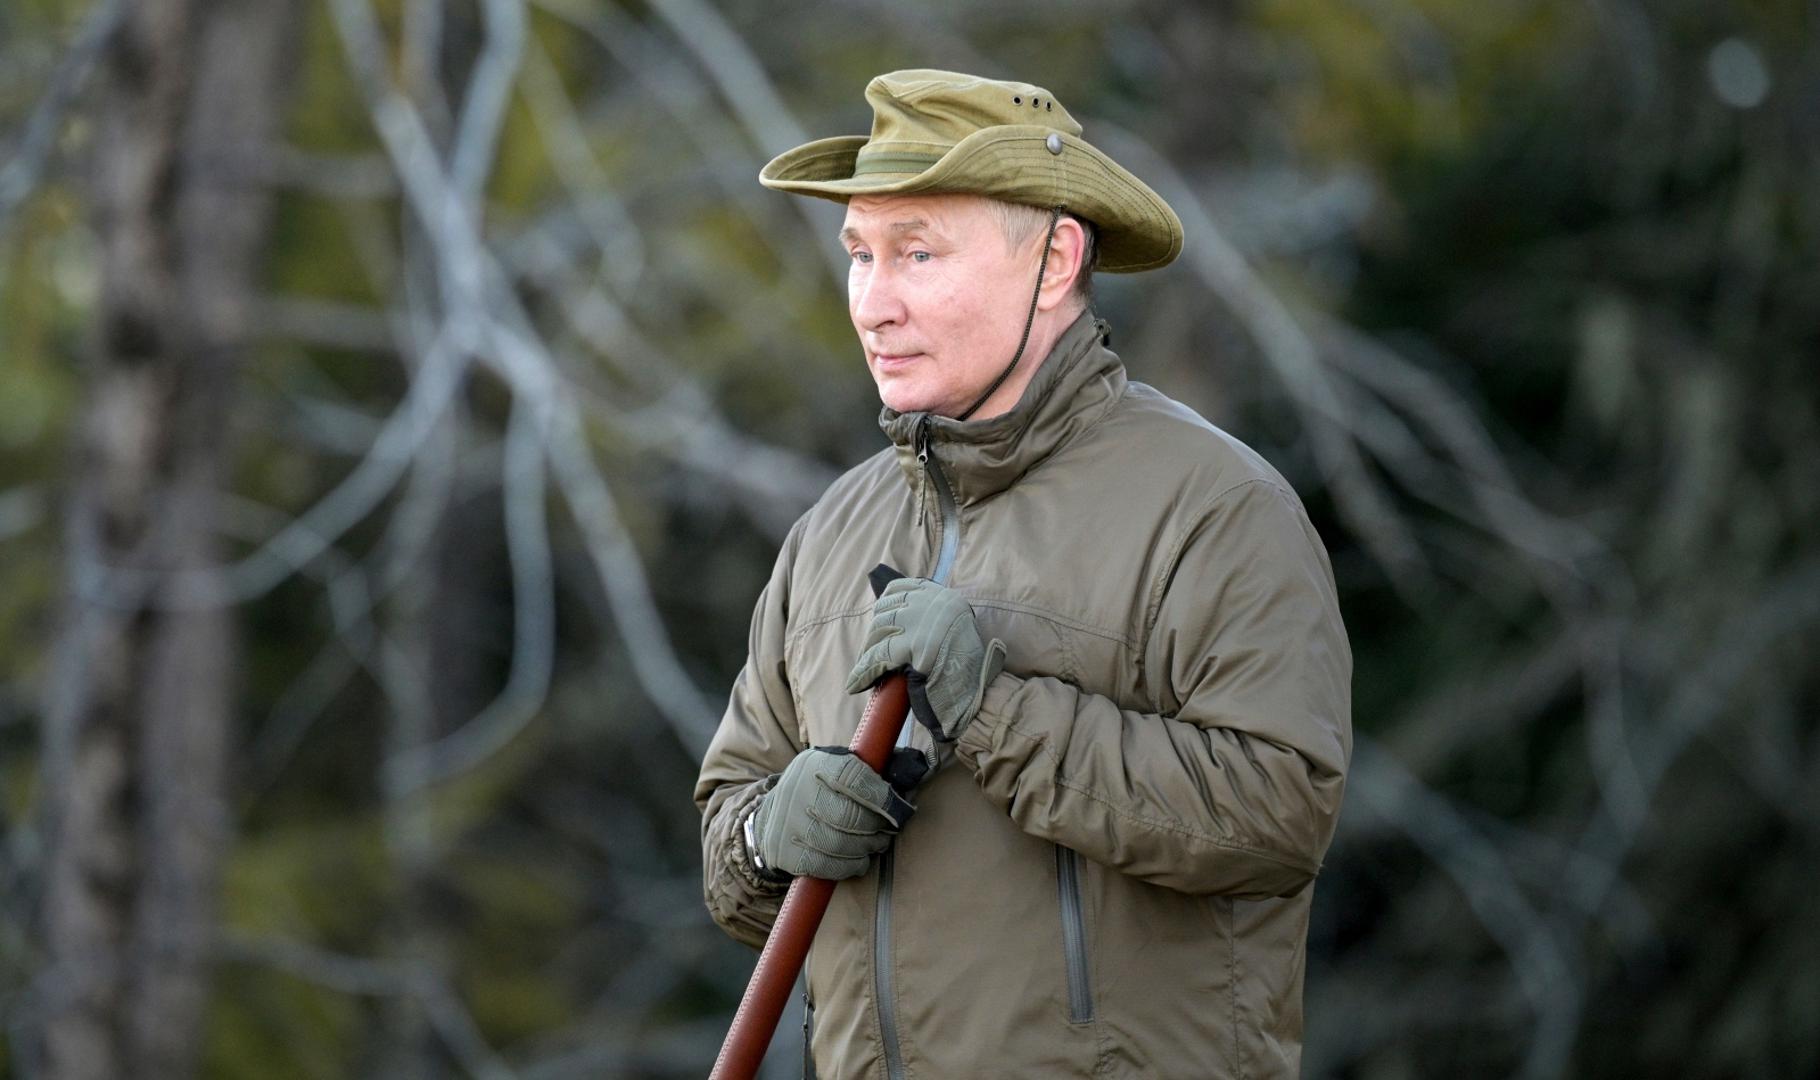 Russian President Vladimir Putin spends vacations in Siberia Russian President Vladimir Putin spends a short vacation at an unknown location in Siberia, Russia, in this undated photo taken in September 2021 and released September 26, 2021. Sputnik/Alexei Druzhinin/Kremlin via REUTERS  ATTENTION EDITORS - THIS IMAGE WAS PROVIDED BY A THIRD PARTY. SPUTNIK